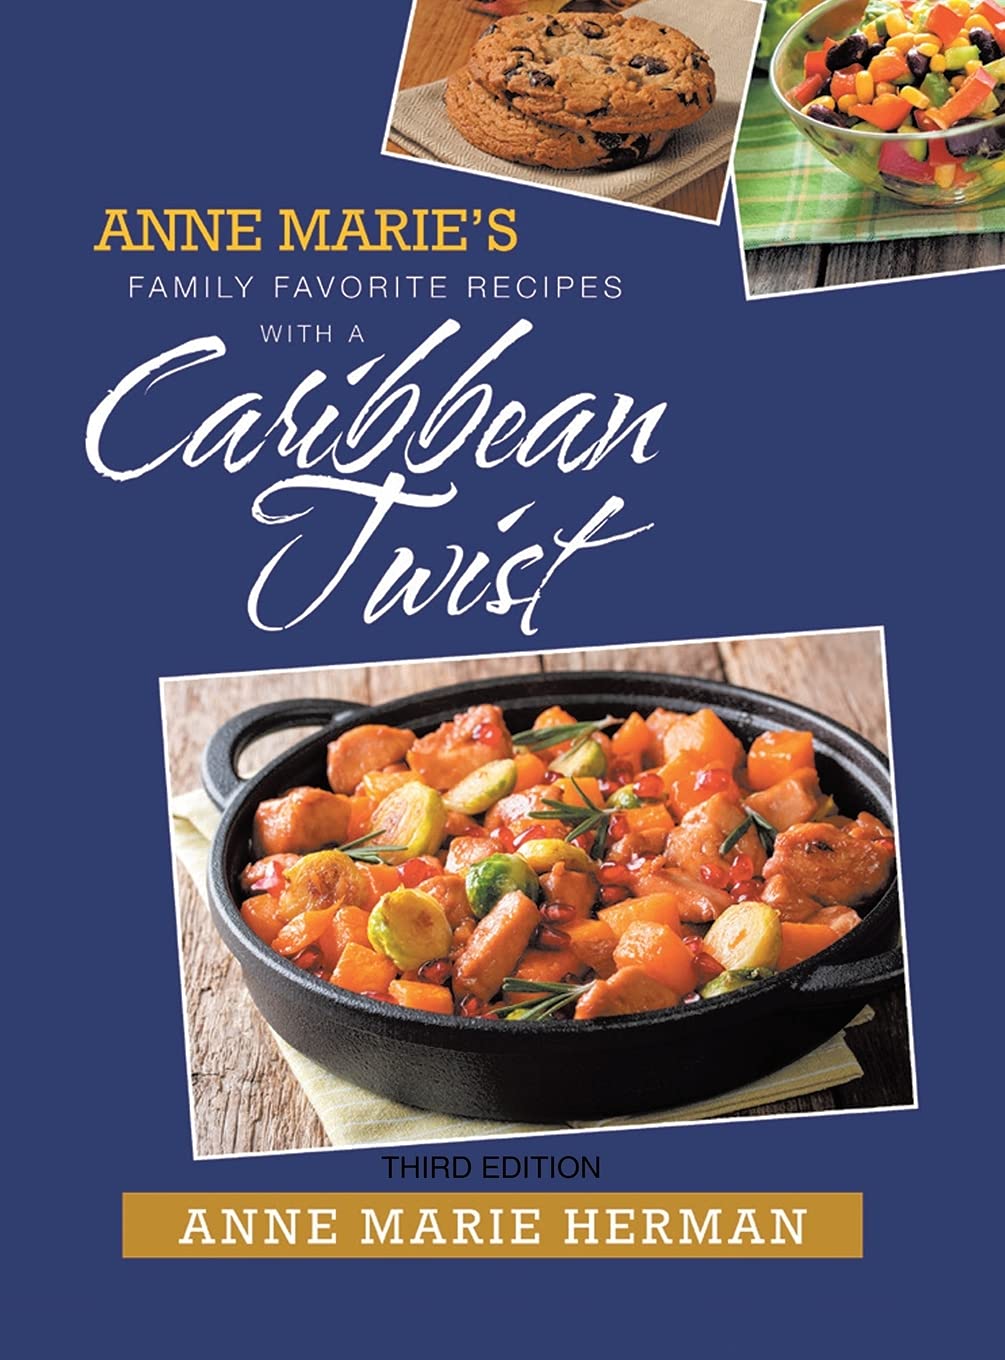 Cover image for book: Anne Marie’s Family Favorite Recipes with a Caribbean Twist